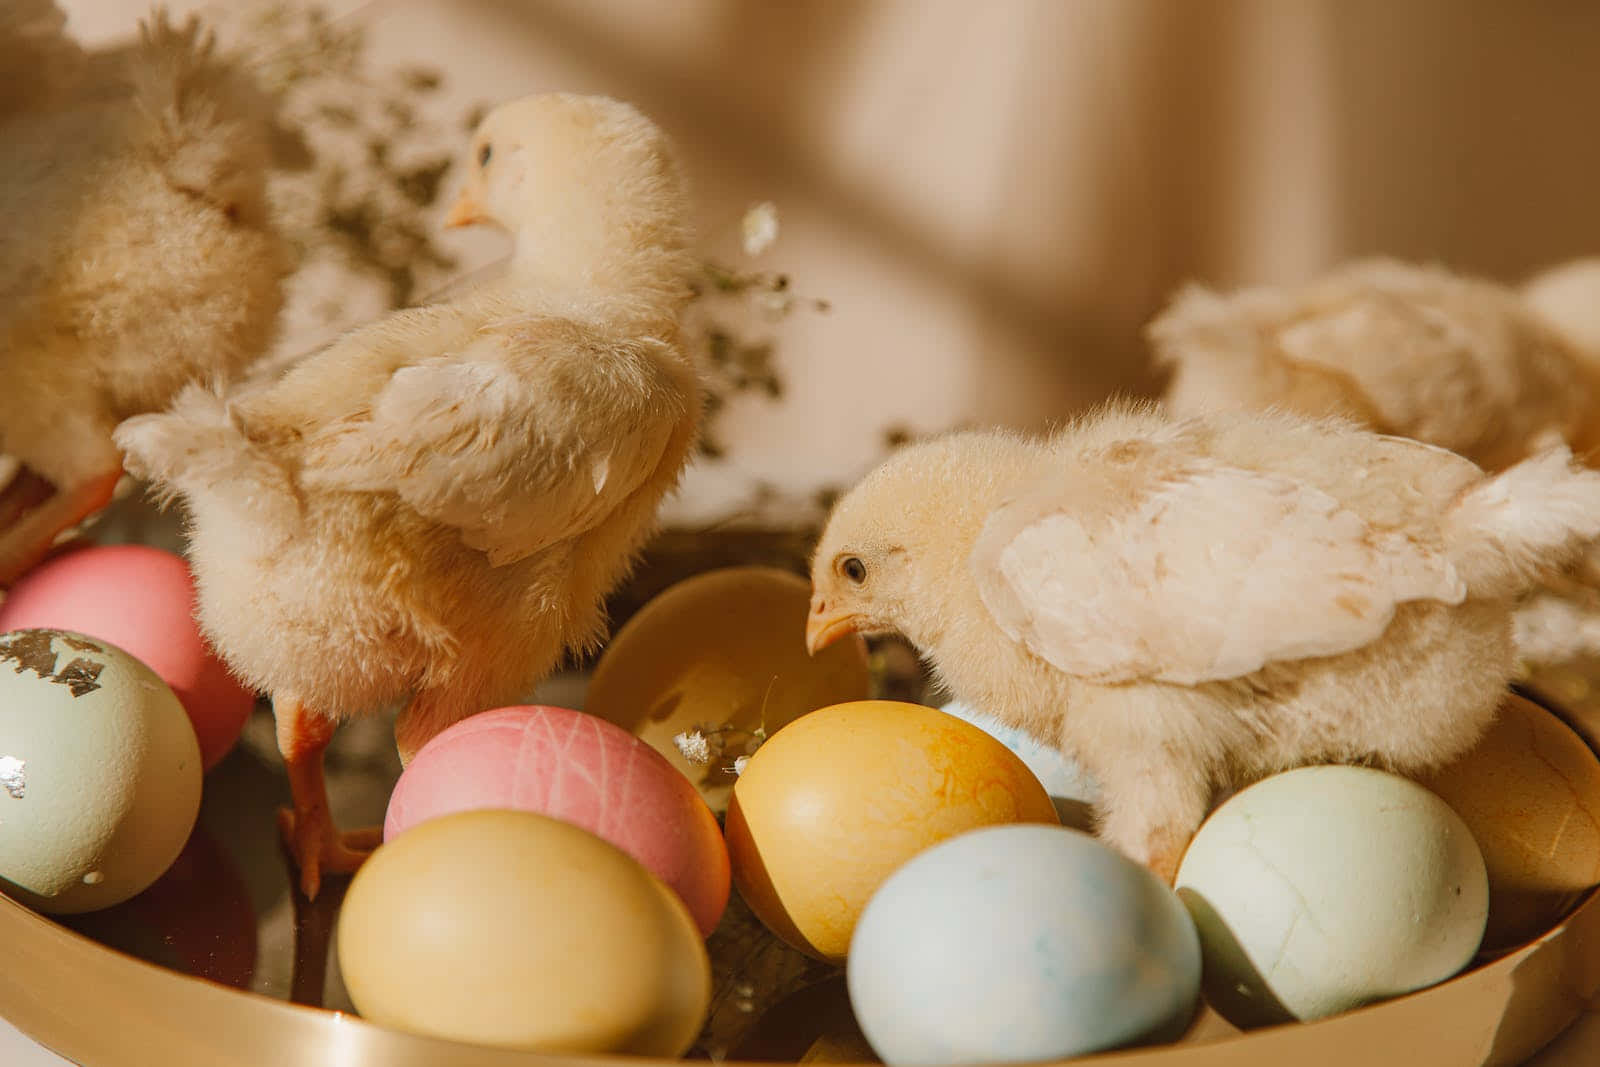 Enjoy a picture perfect pastel Easter Wallpaper